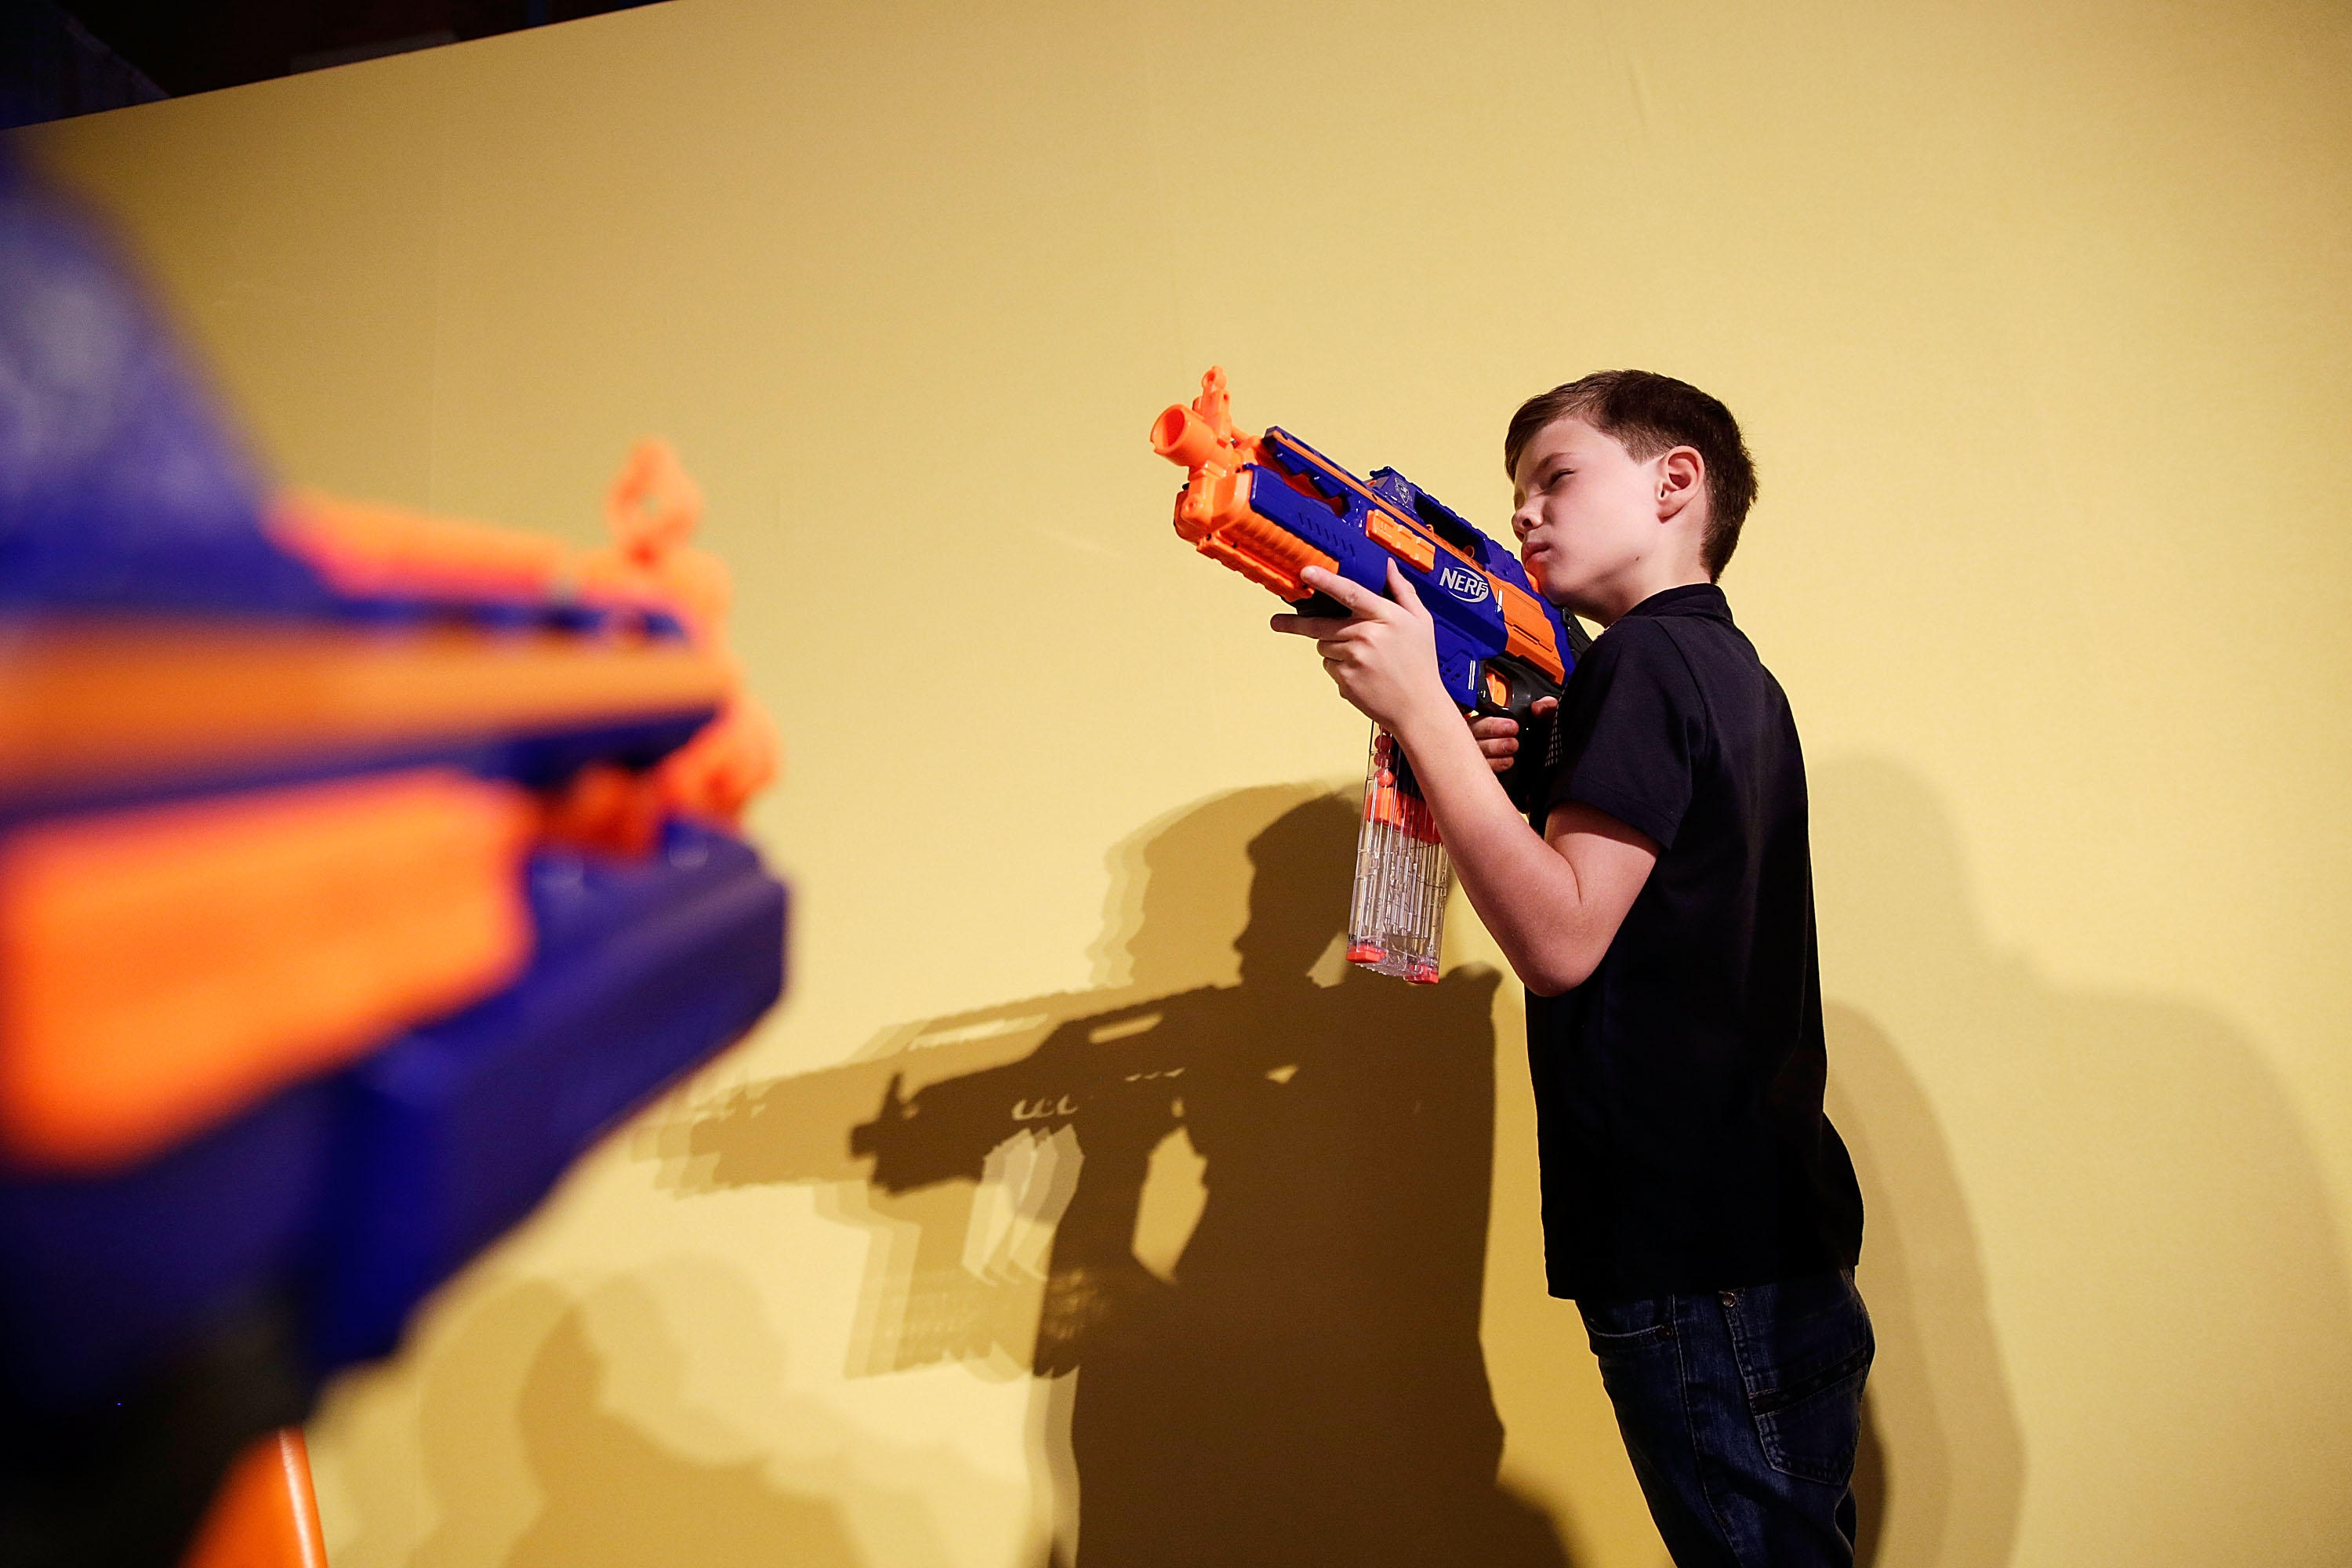 Nerf guns can lead to serious eye injuries, doctors warn